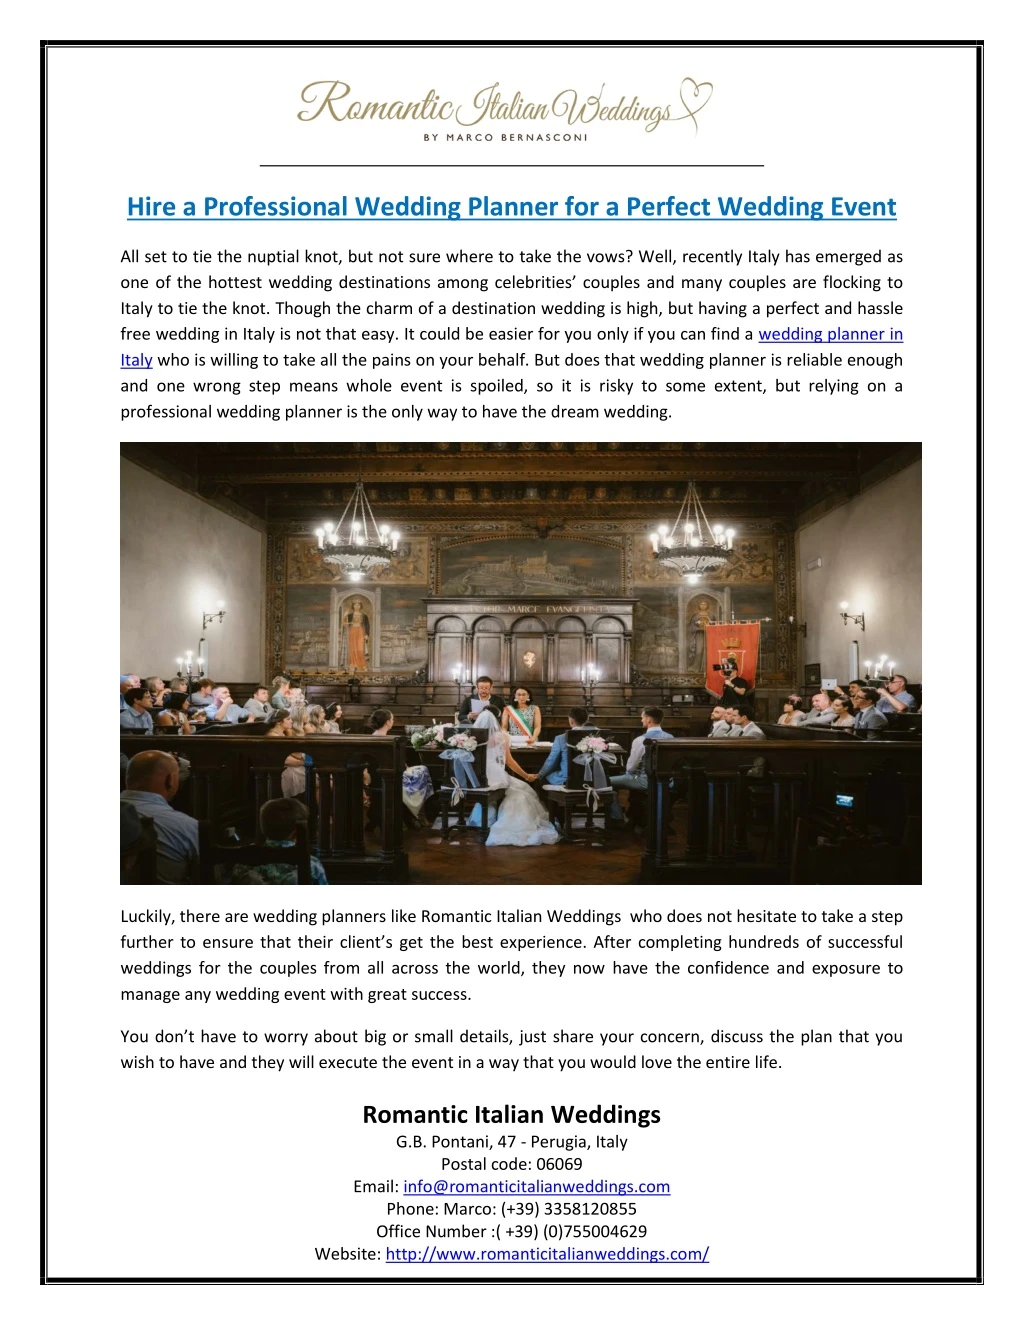 hire a professional wedding planner for a perfect